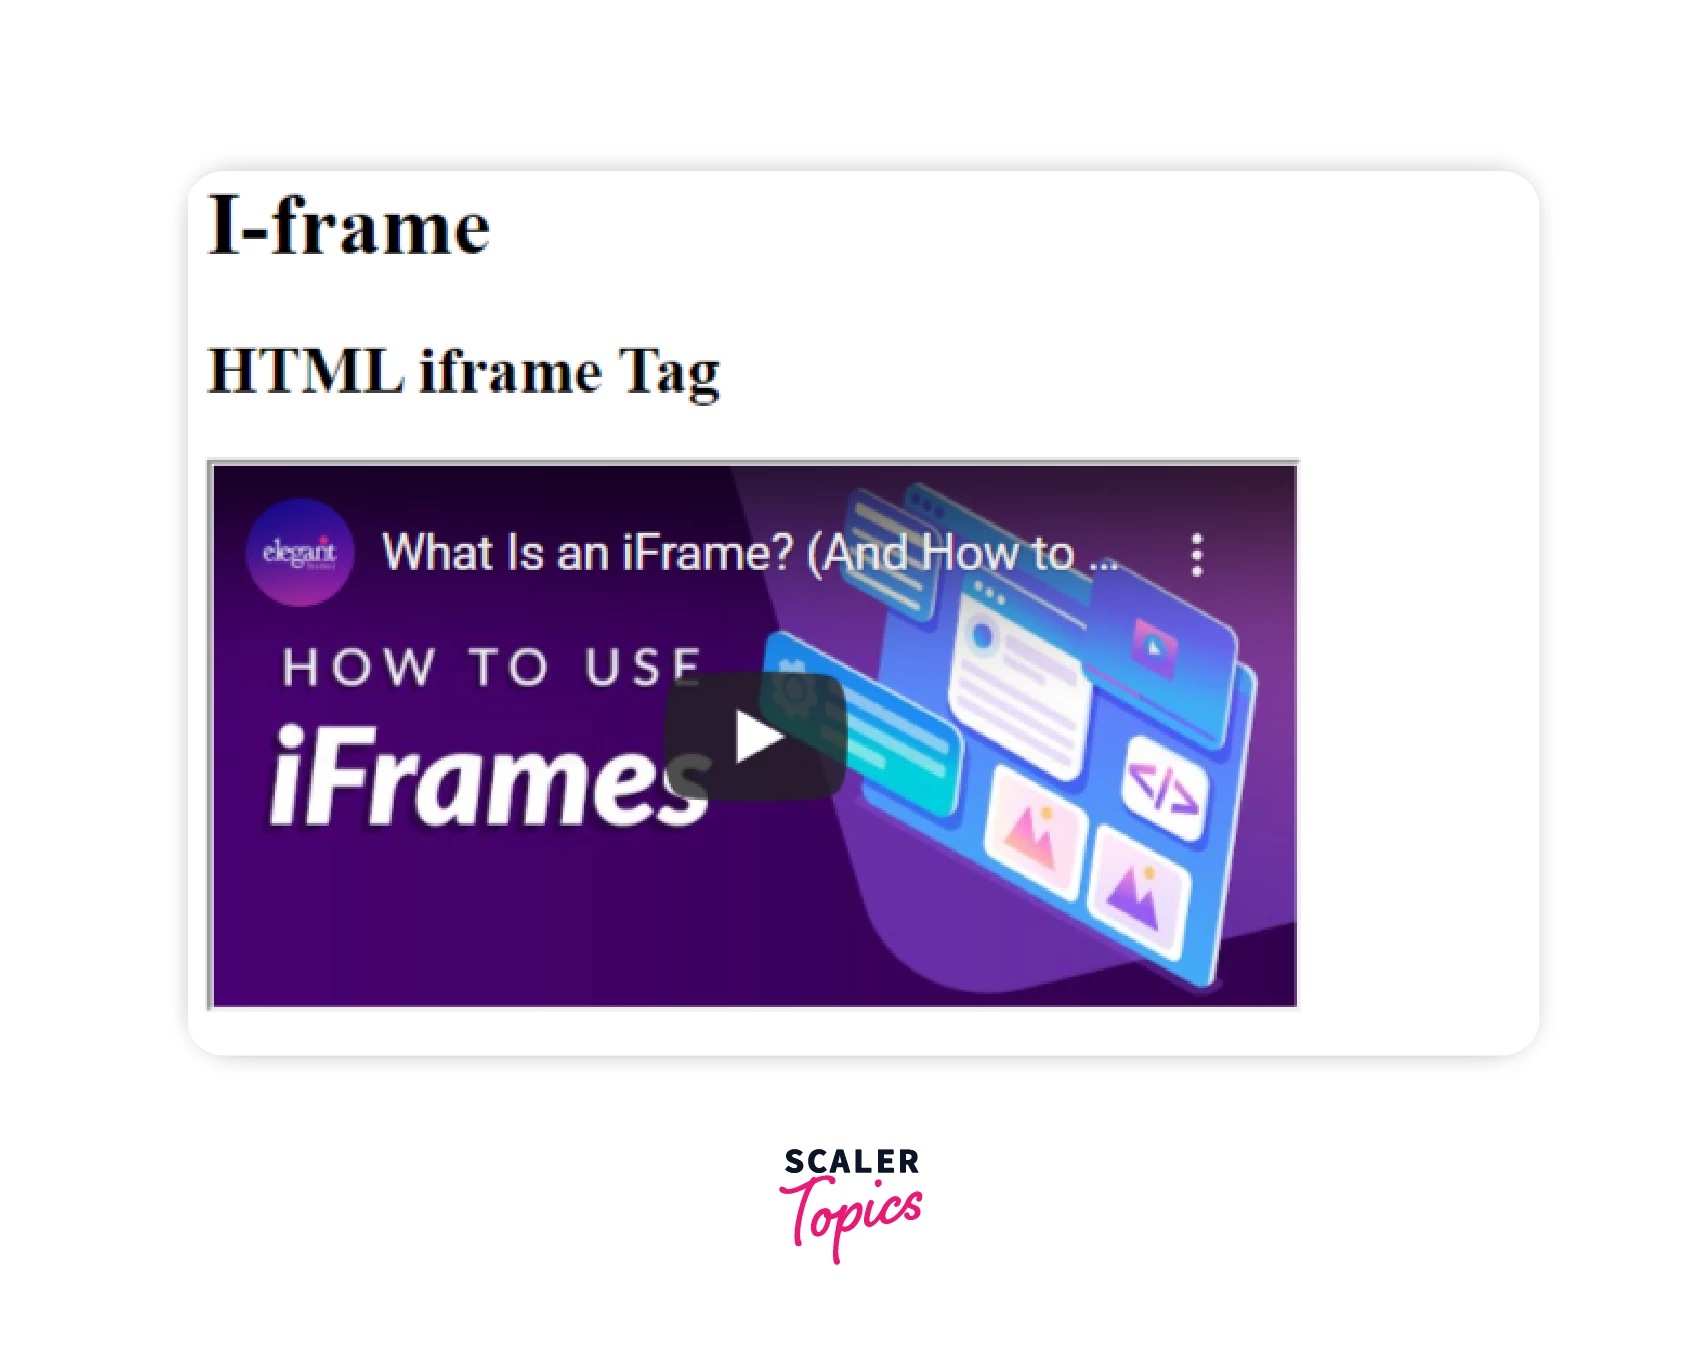 Iframe - Set Height and Width